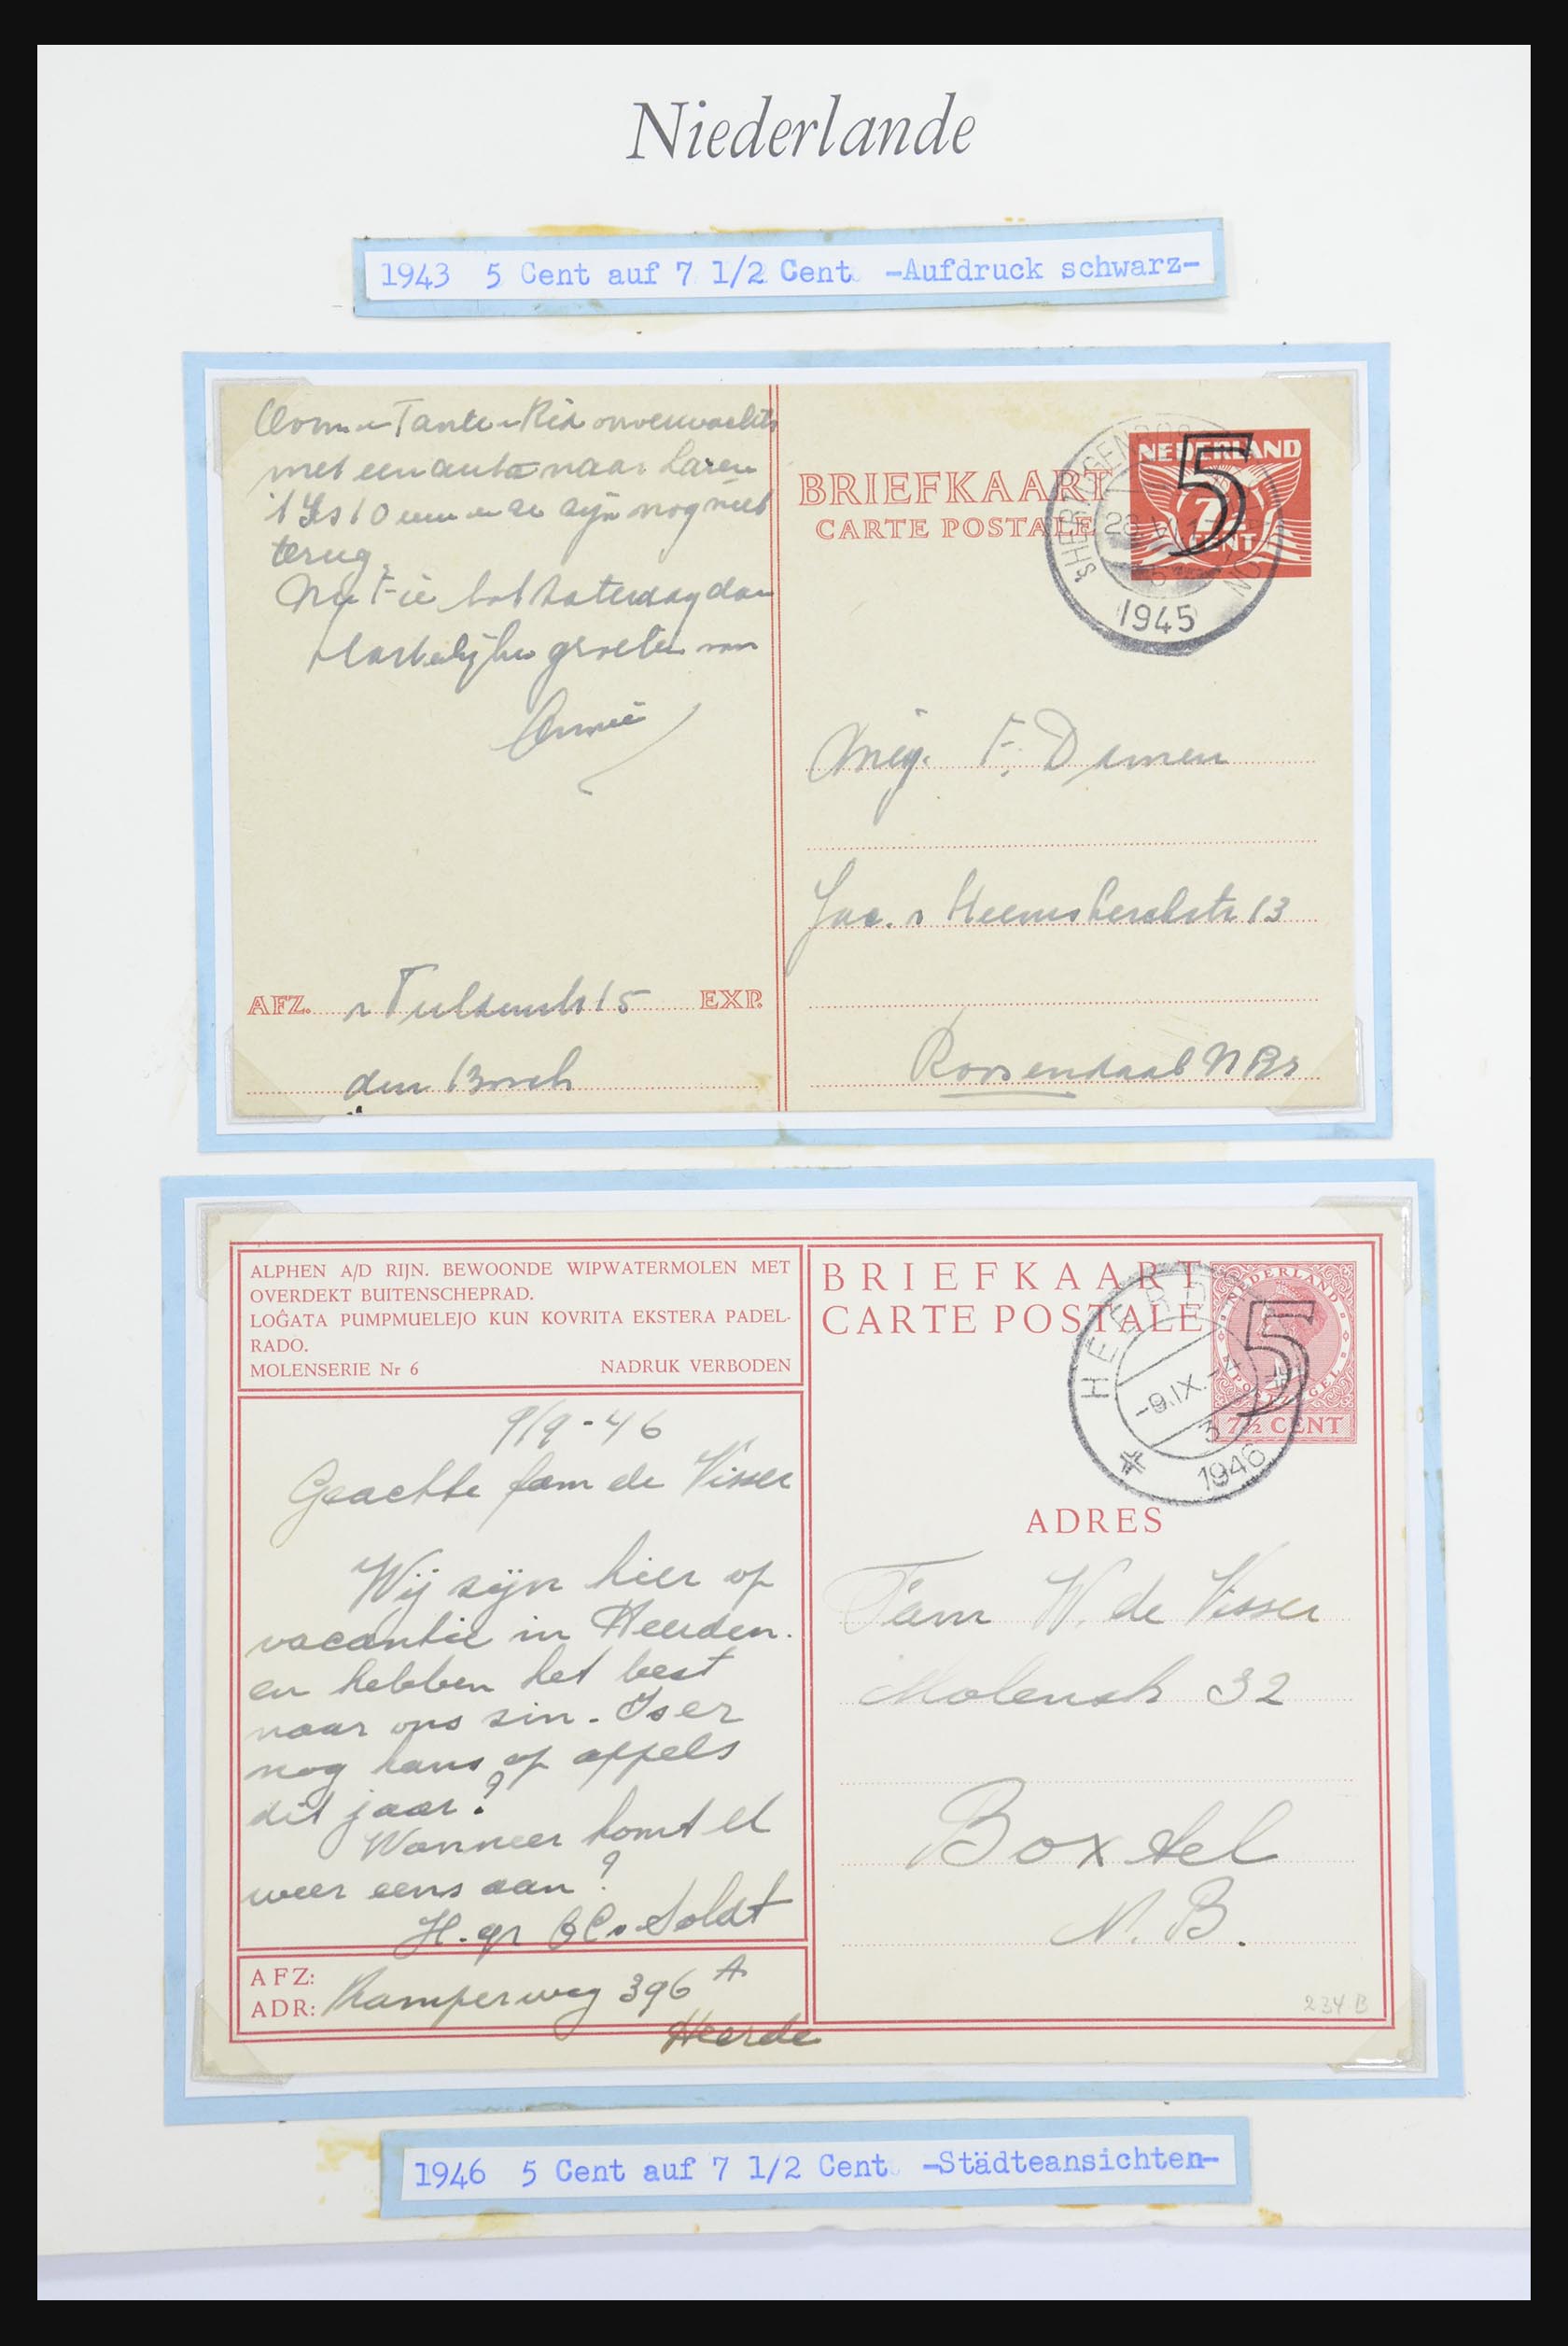 32159 051 - 32159 Netherlands covers 1925-1946.